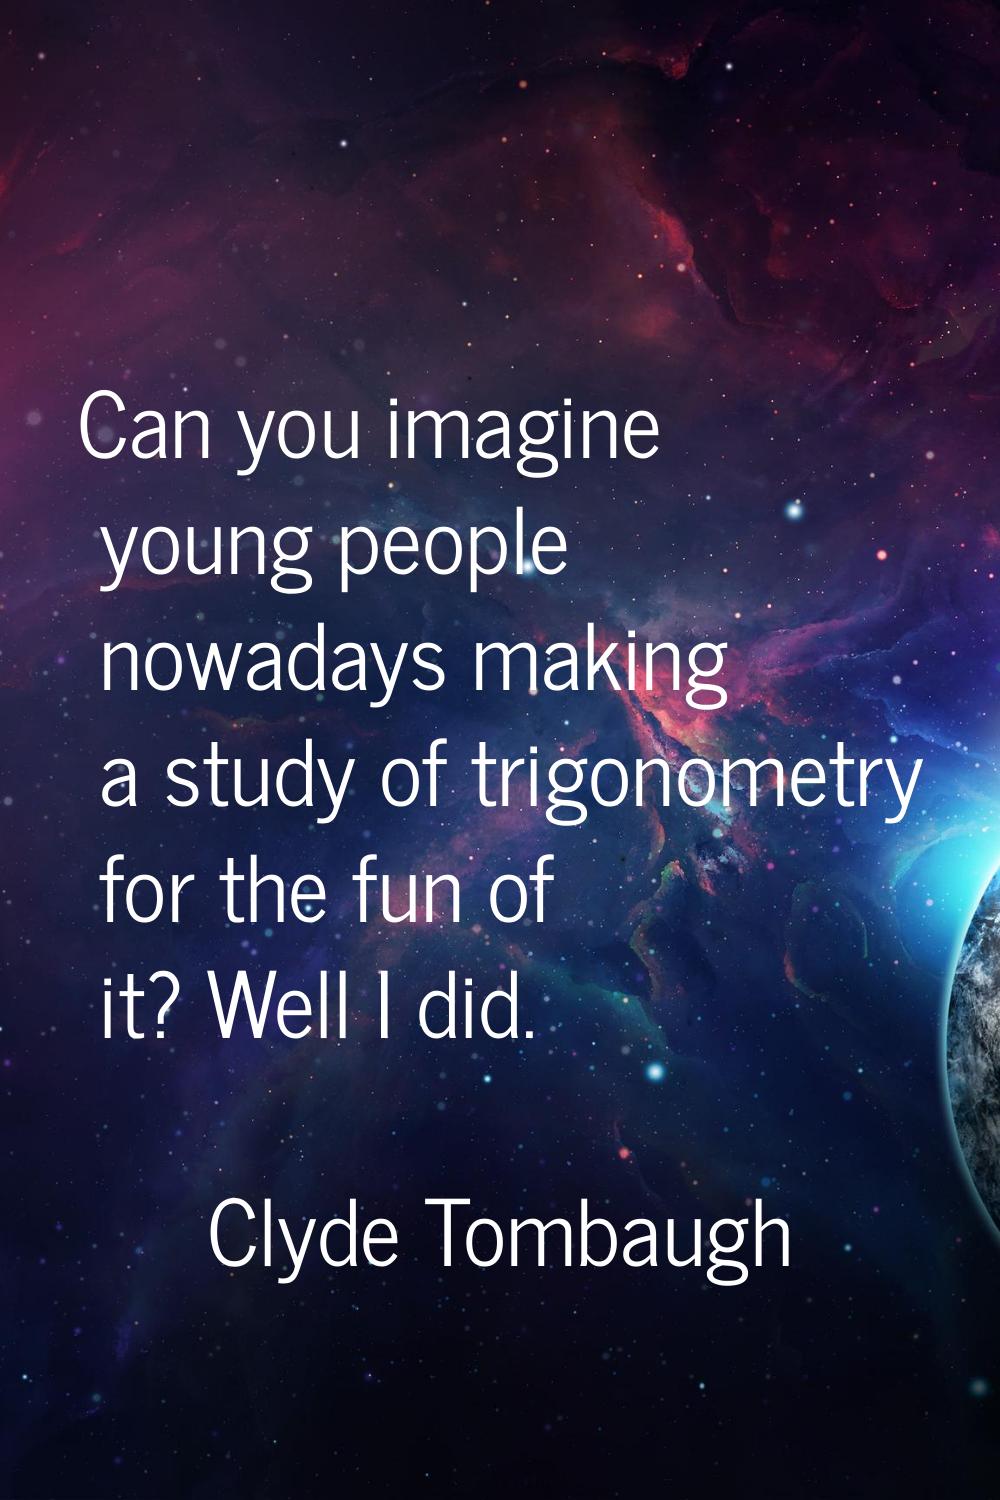 Can you imagine young people nowadays making a study of trigonometry for the fun of it? Well I did.